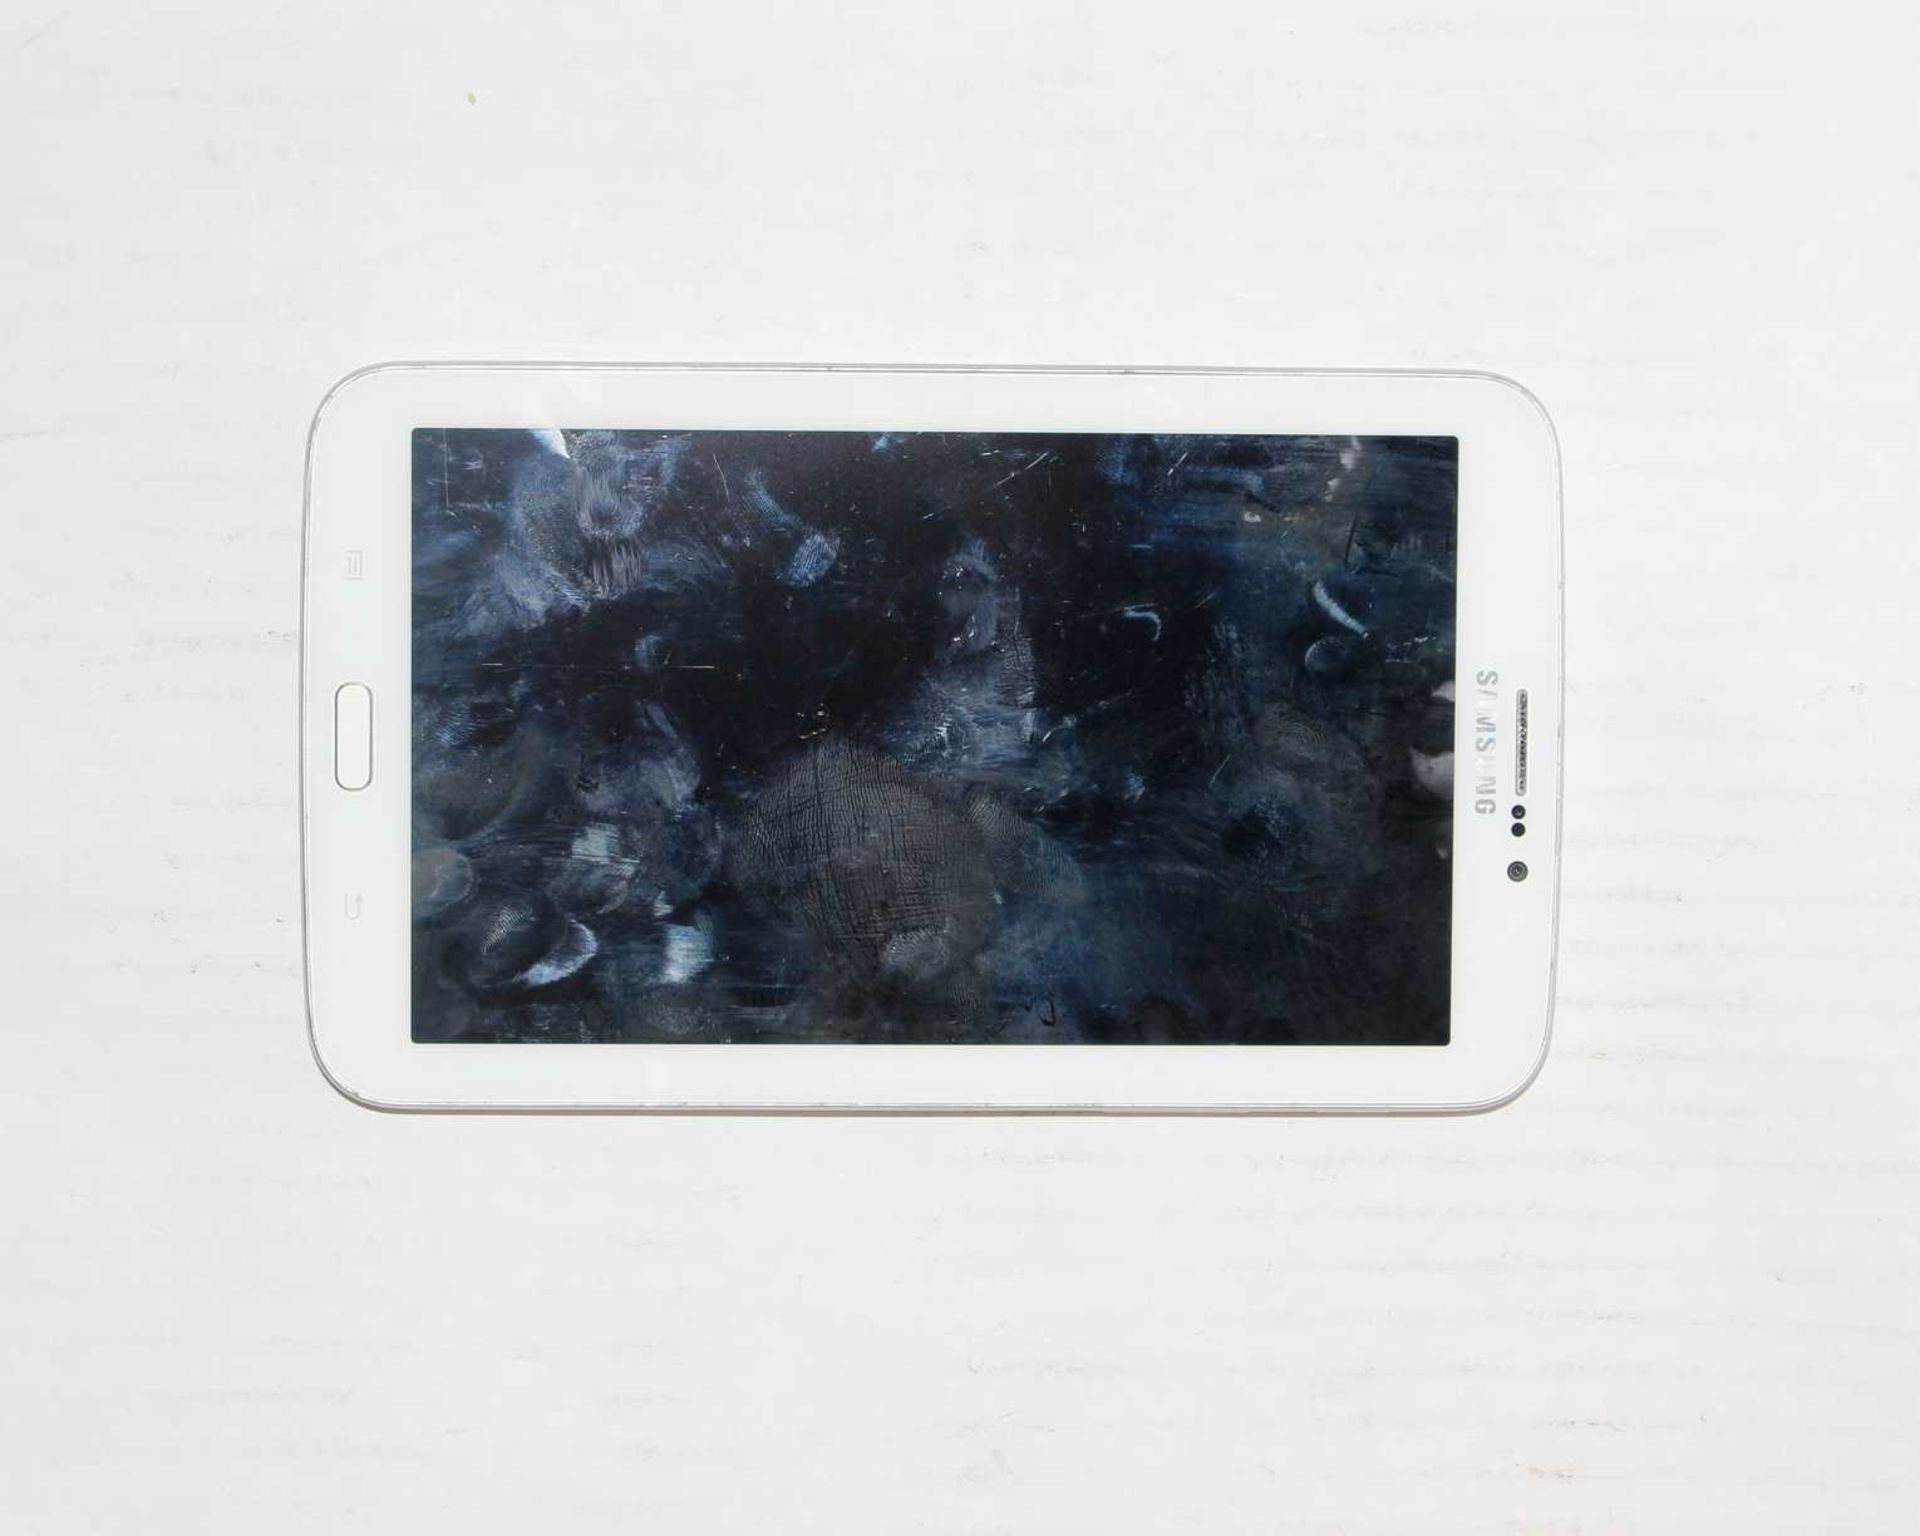 A pre-owned Samsung Galaxy Tab 3 7.0 3G SM-T211 8GB in White (IMEI:35764705002811) (FRP clear).